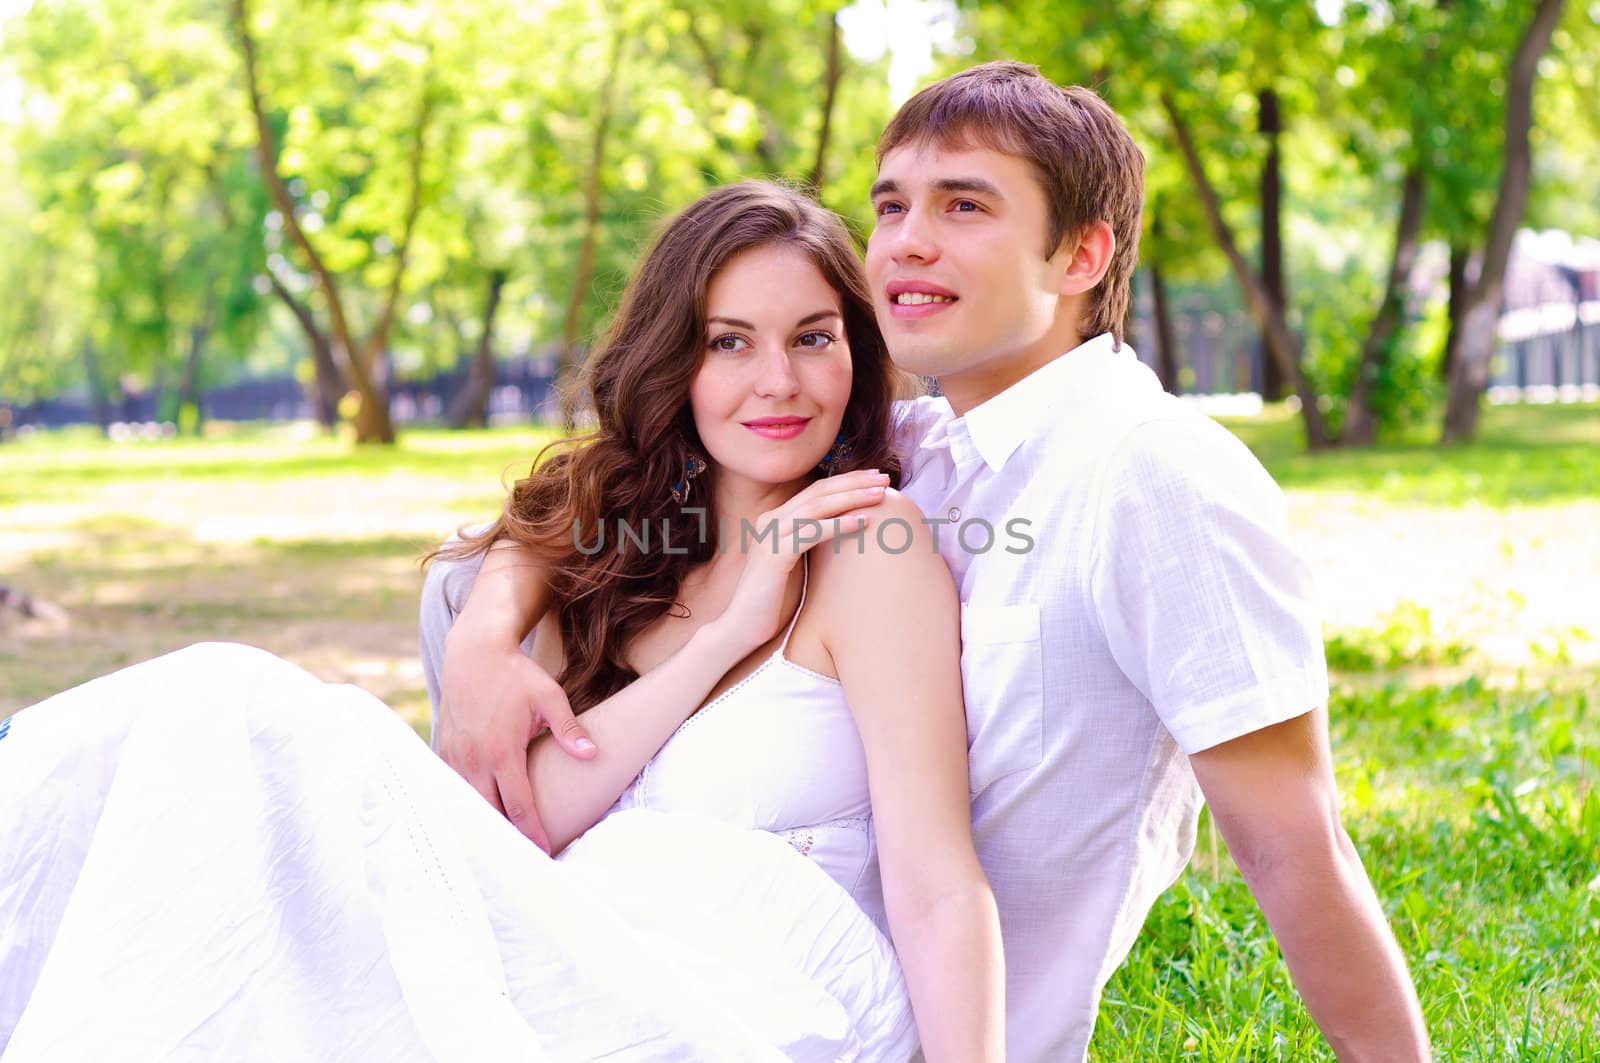 couple in the park sitting on the grass, have a good time together